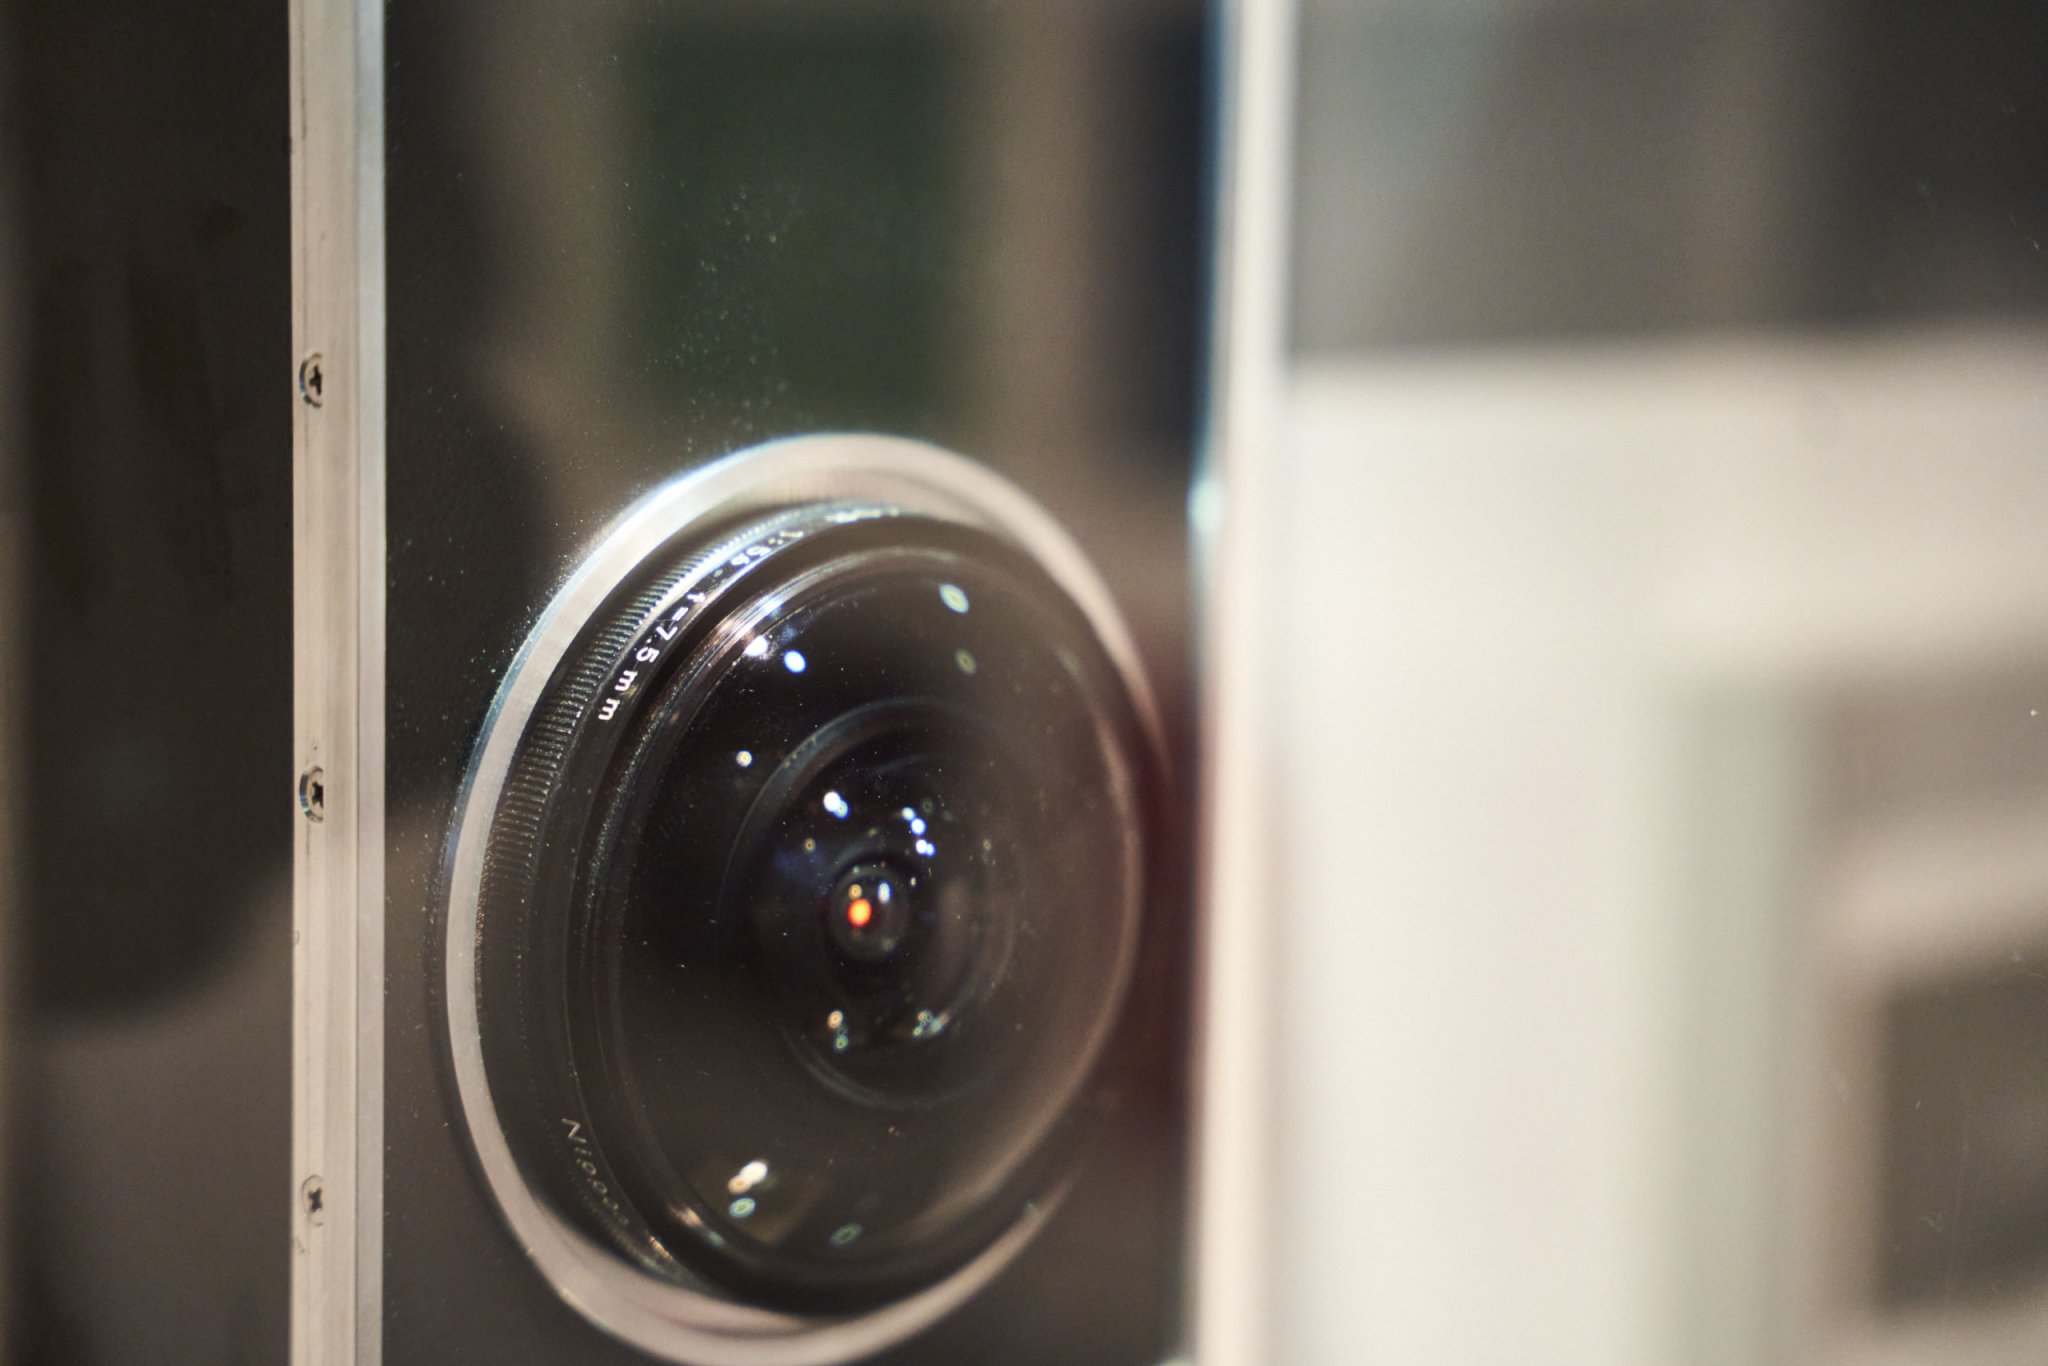 HAL 9000: How This Nikon Fisheye Lens Inspired Hollywood and Culture